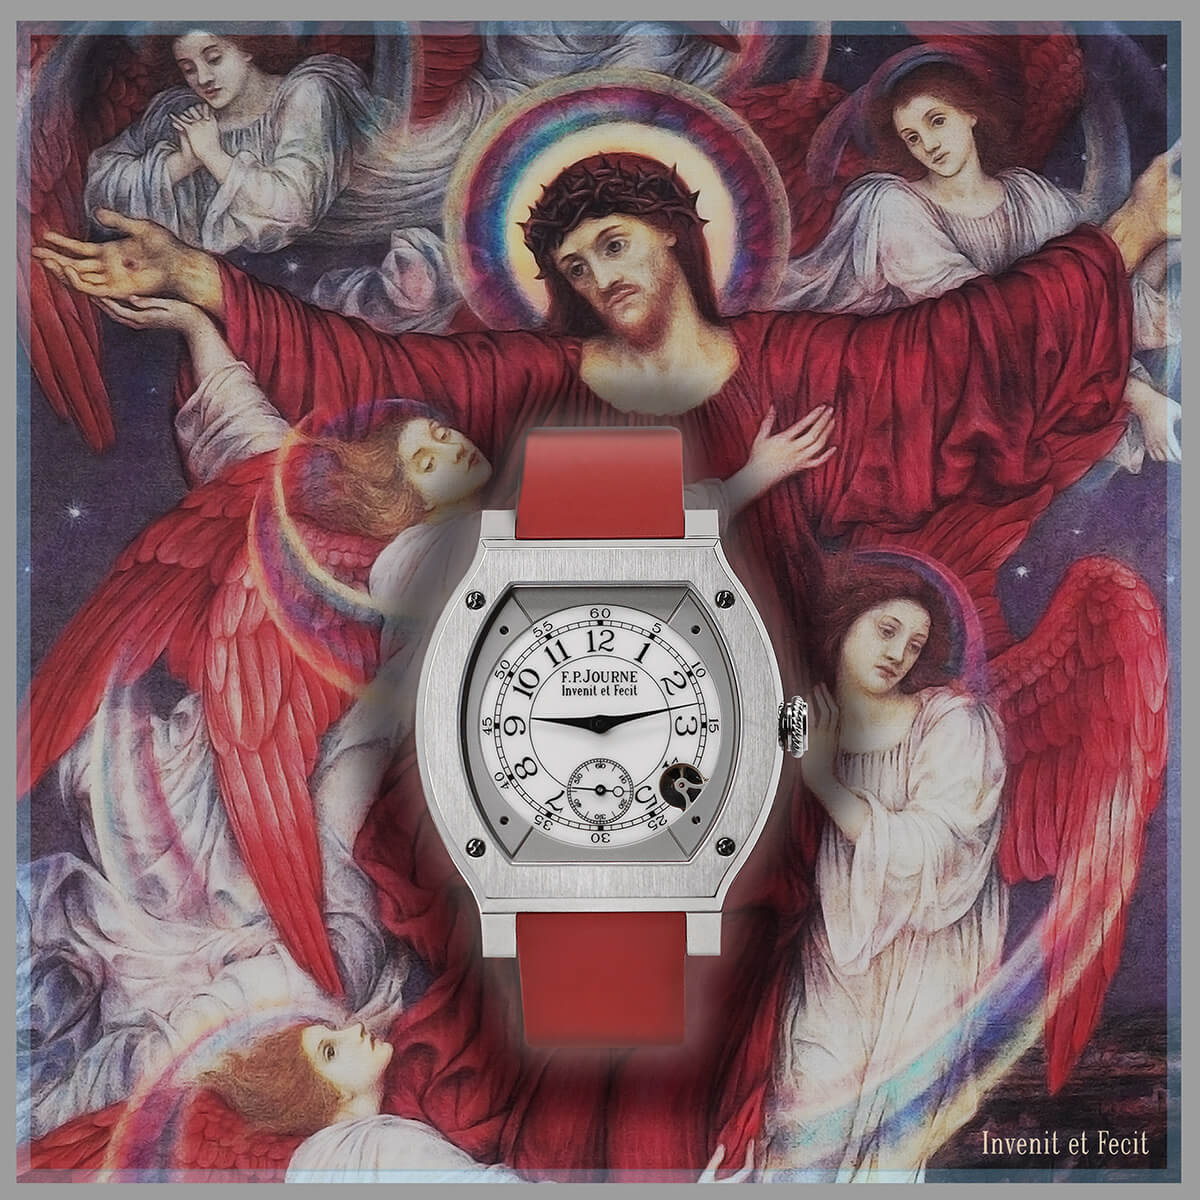 F.P. Journe Elegante 48 mm over The Red Cross by Evelyn de Morgan (image courtesy @thehealer74)